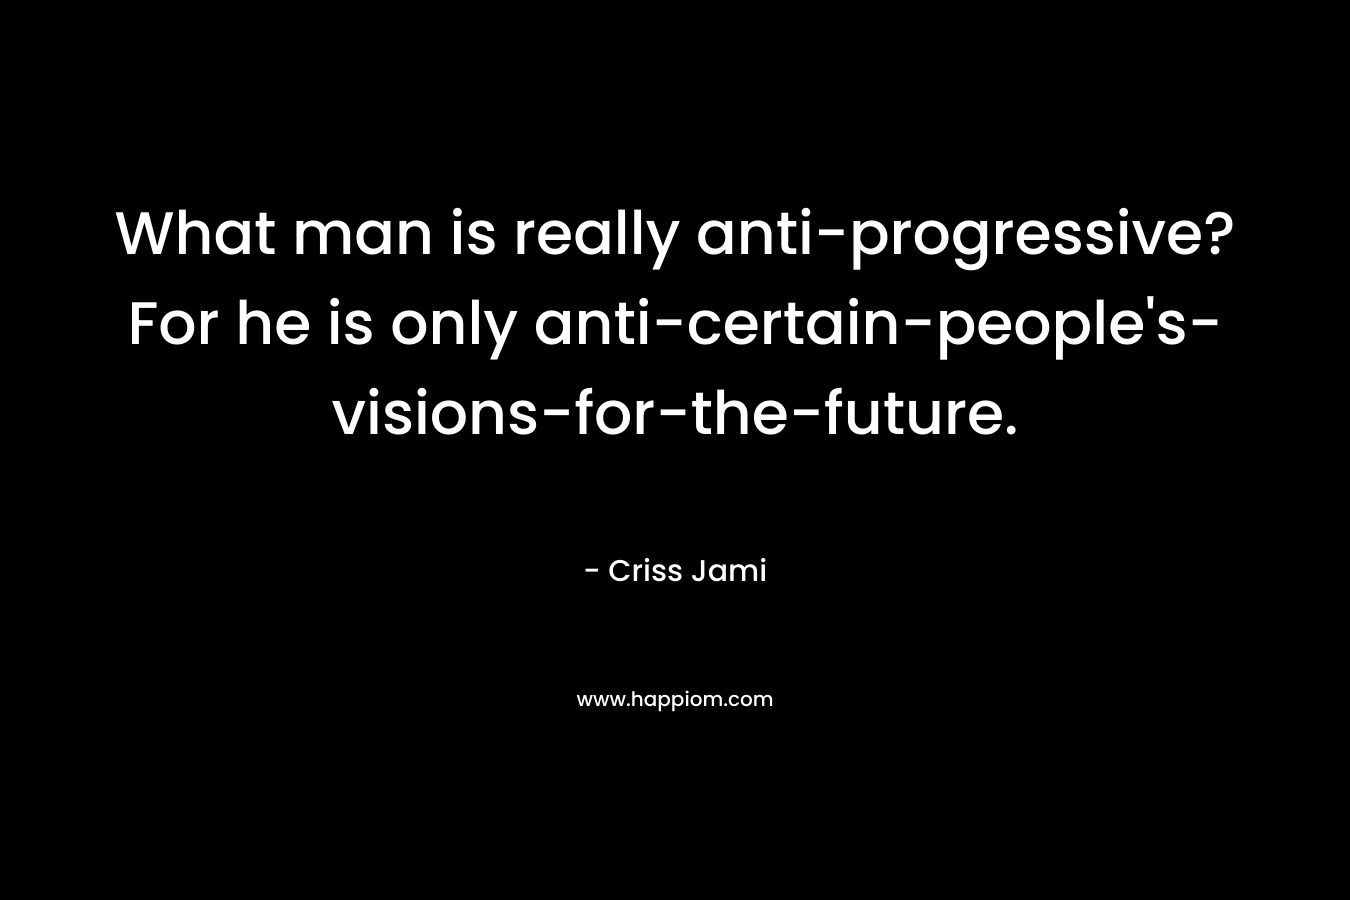 What man is really anti-progressive? For he is only anti-certain-people's-visions-for-the-future.